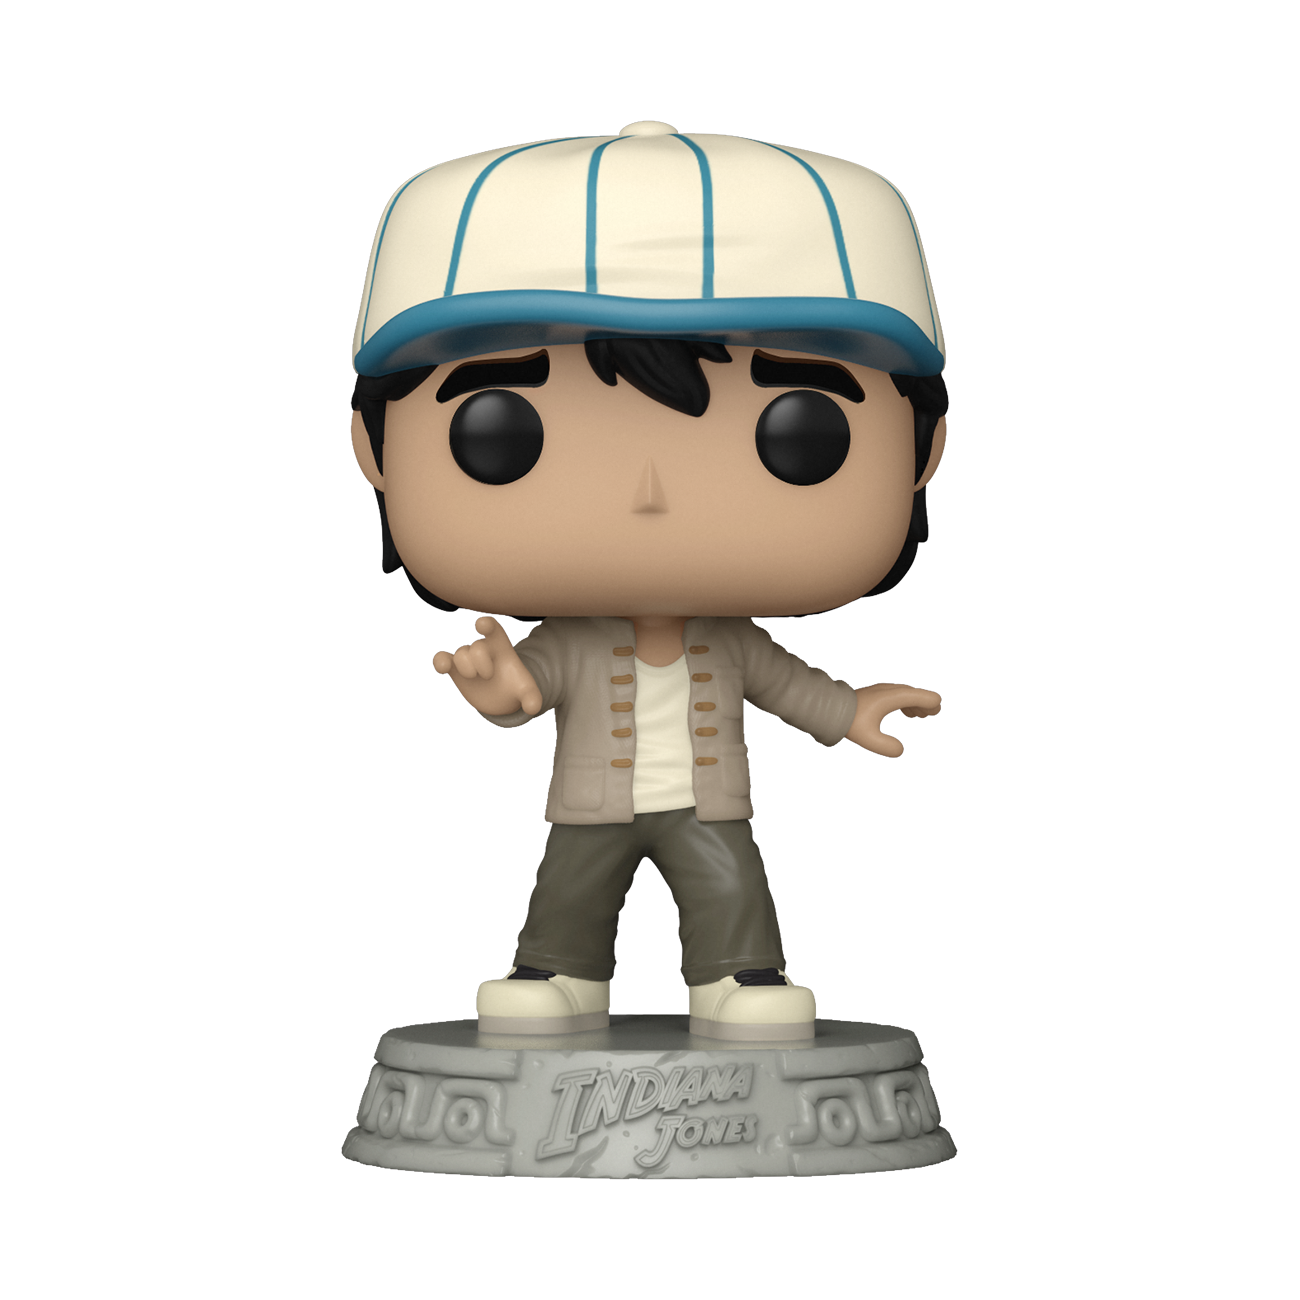 Funko Indiana Jones Pop Figures, Loungefly Bags, and Games Are On Sale Now